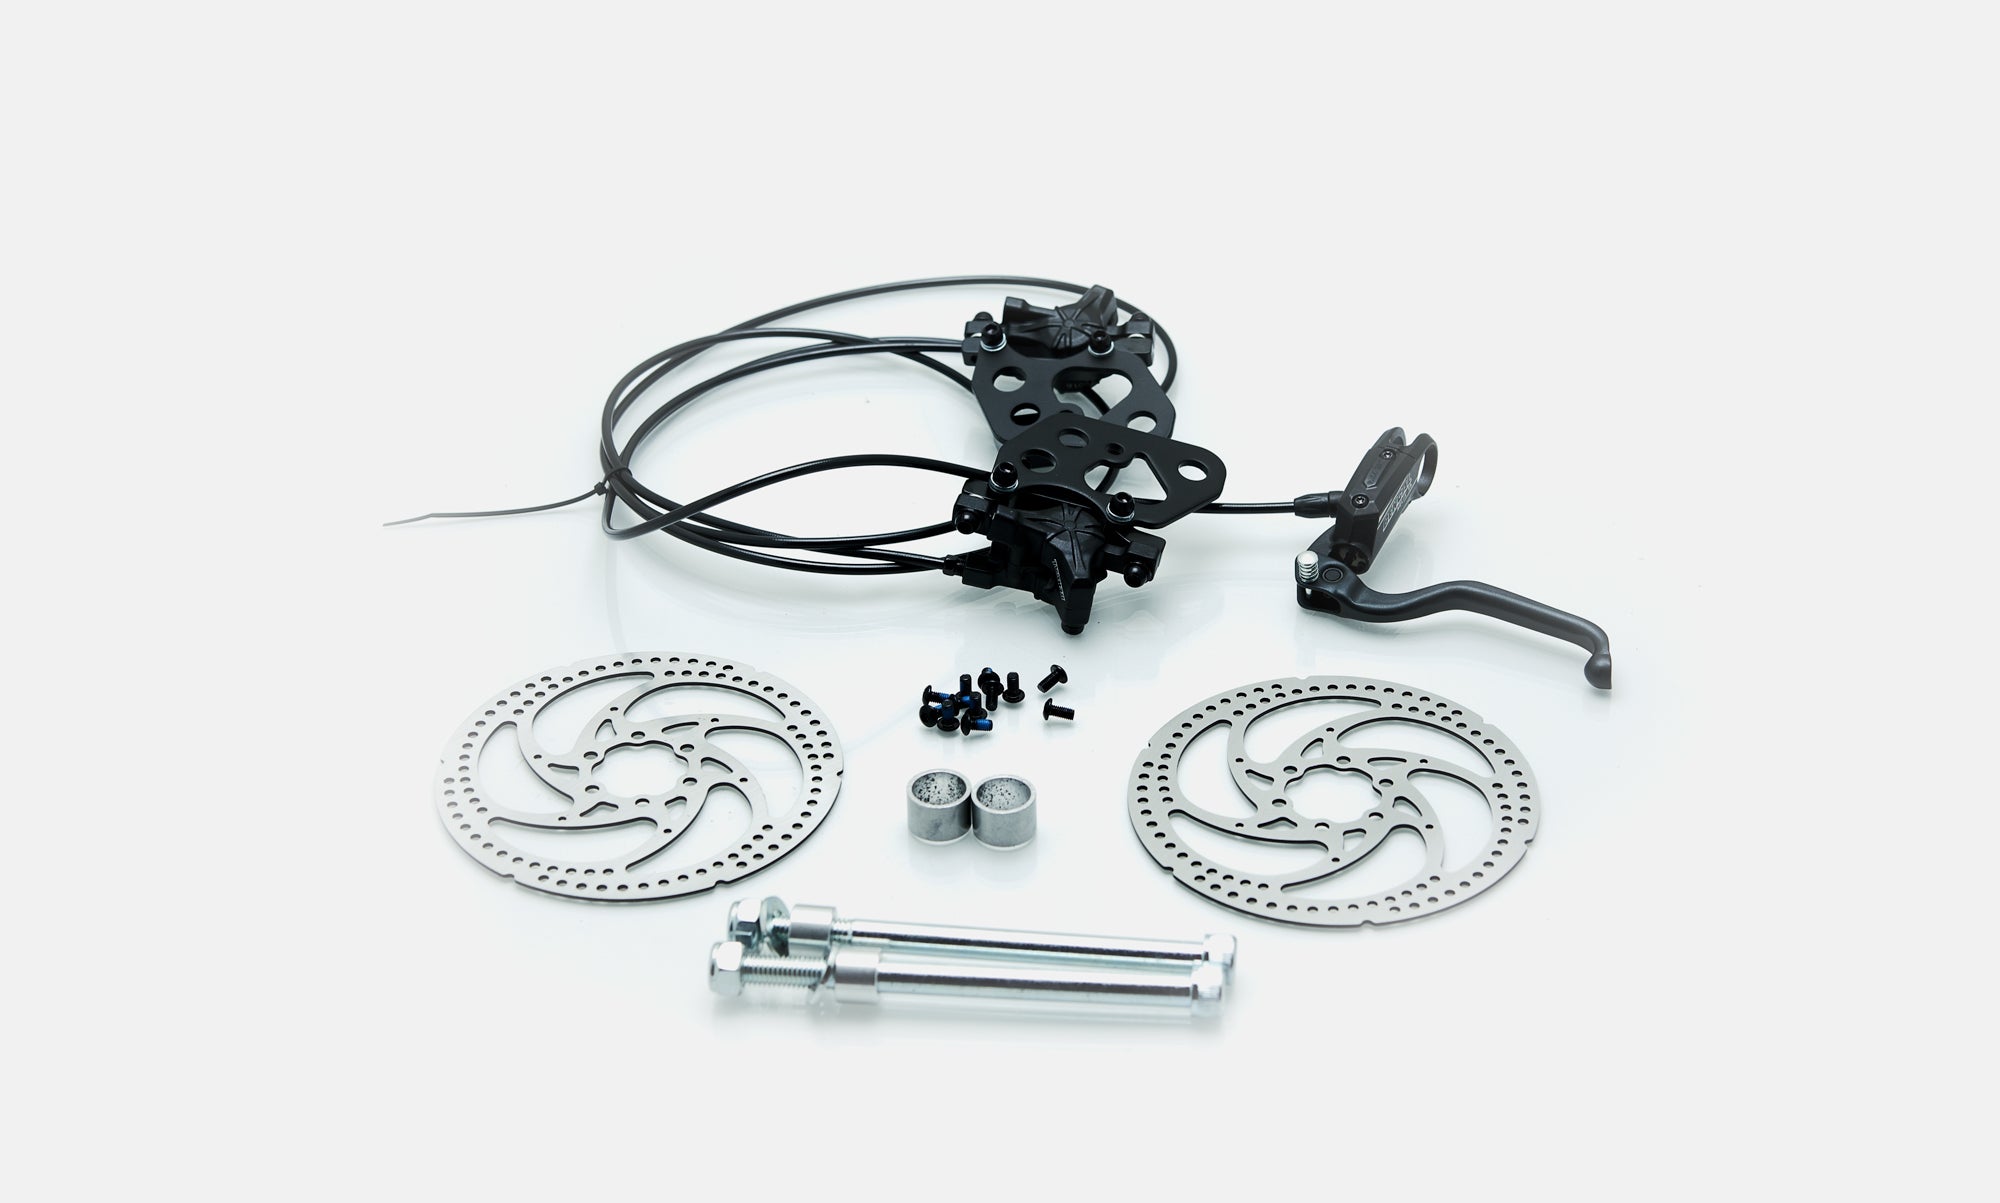 Front Hydraulic Disk Brakes